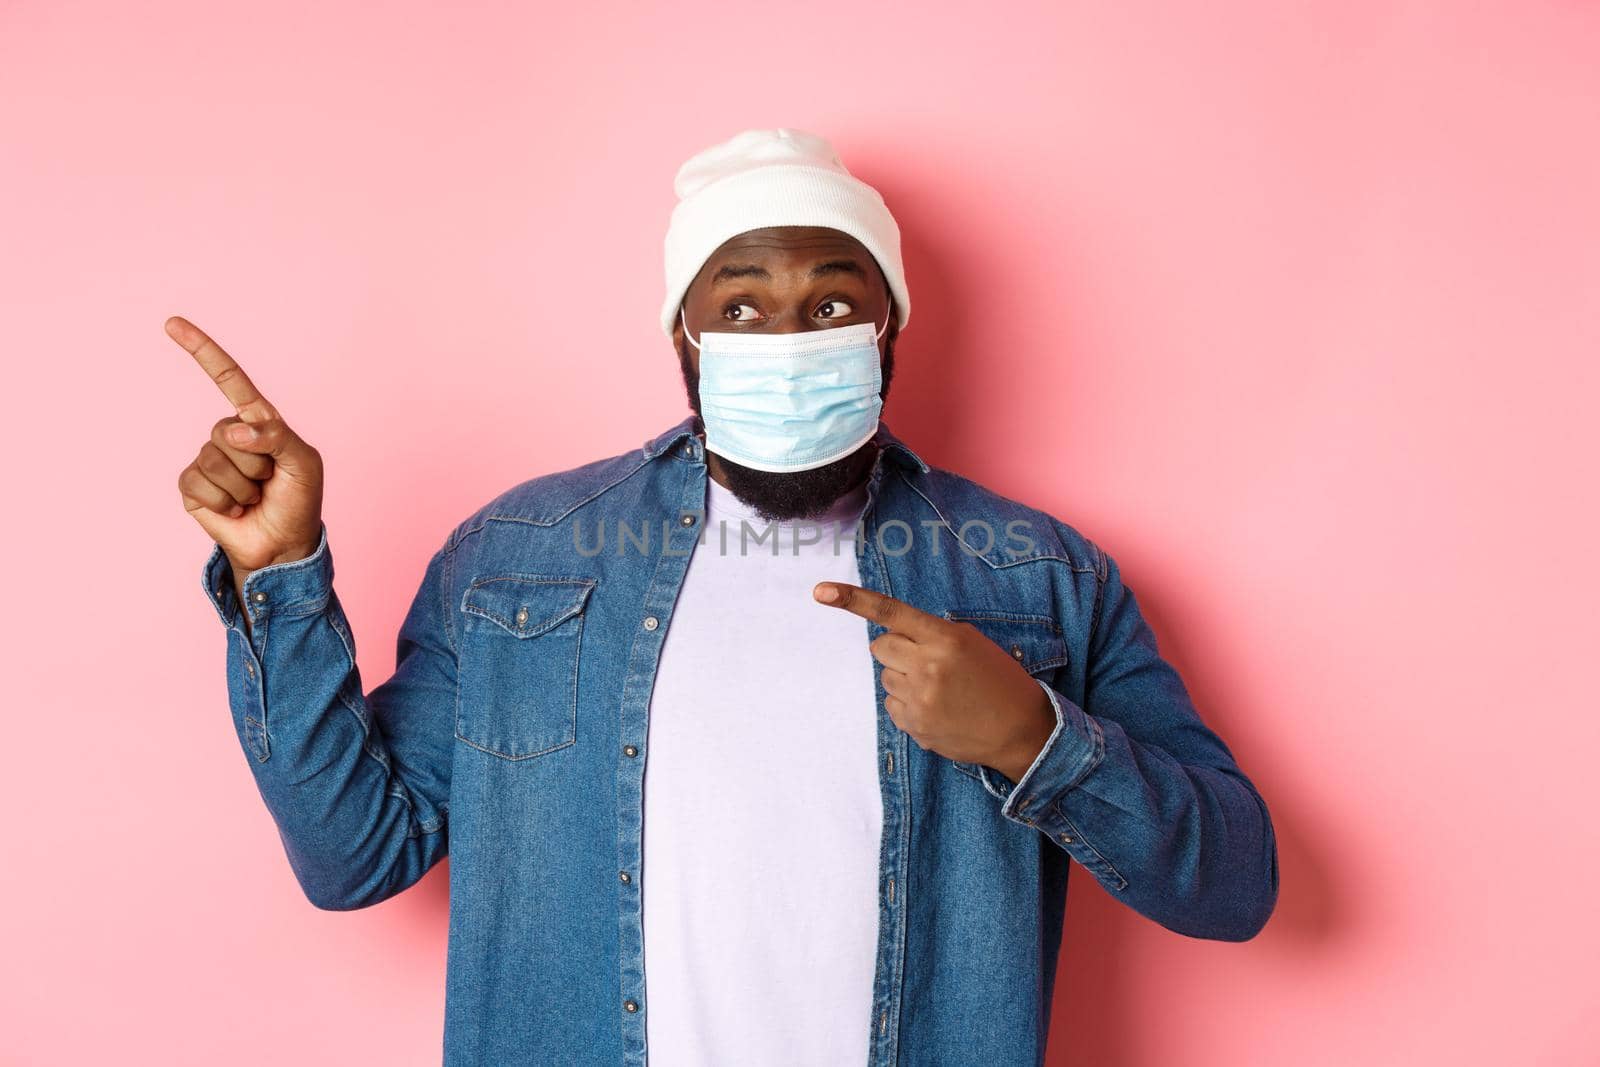 Coronavirus, lifestyle and global pandemic concept. Amused african-american male model in face mask pointing, looking left at promo offer, showing banner, pink background.